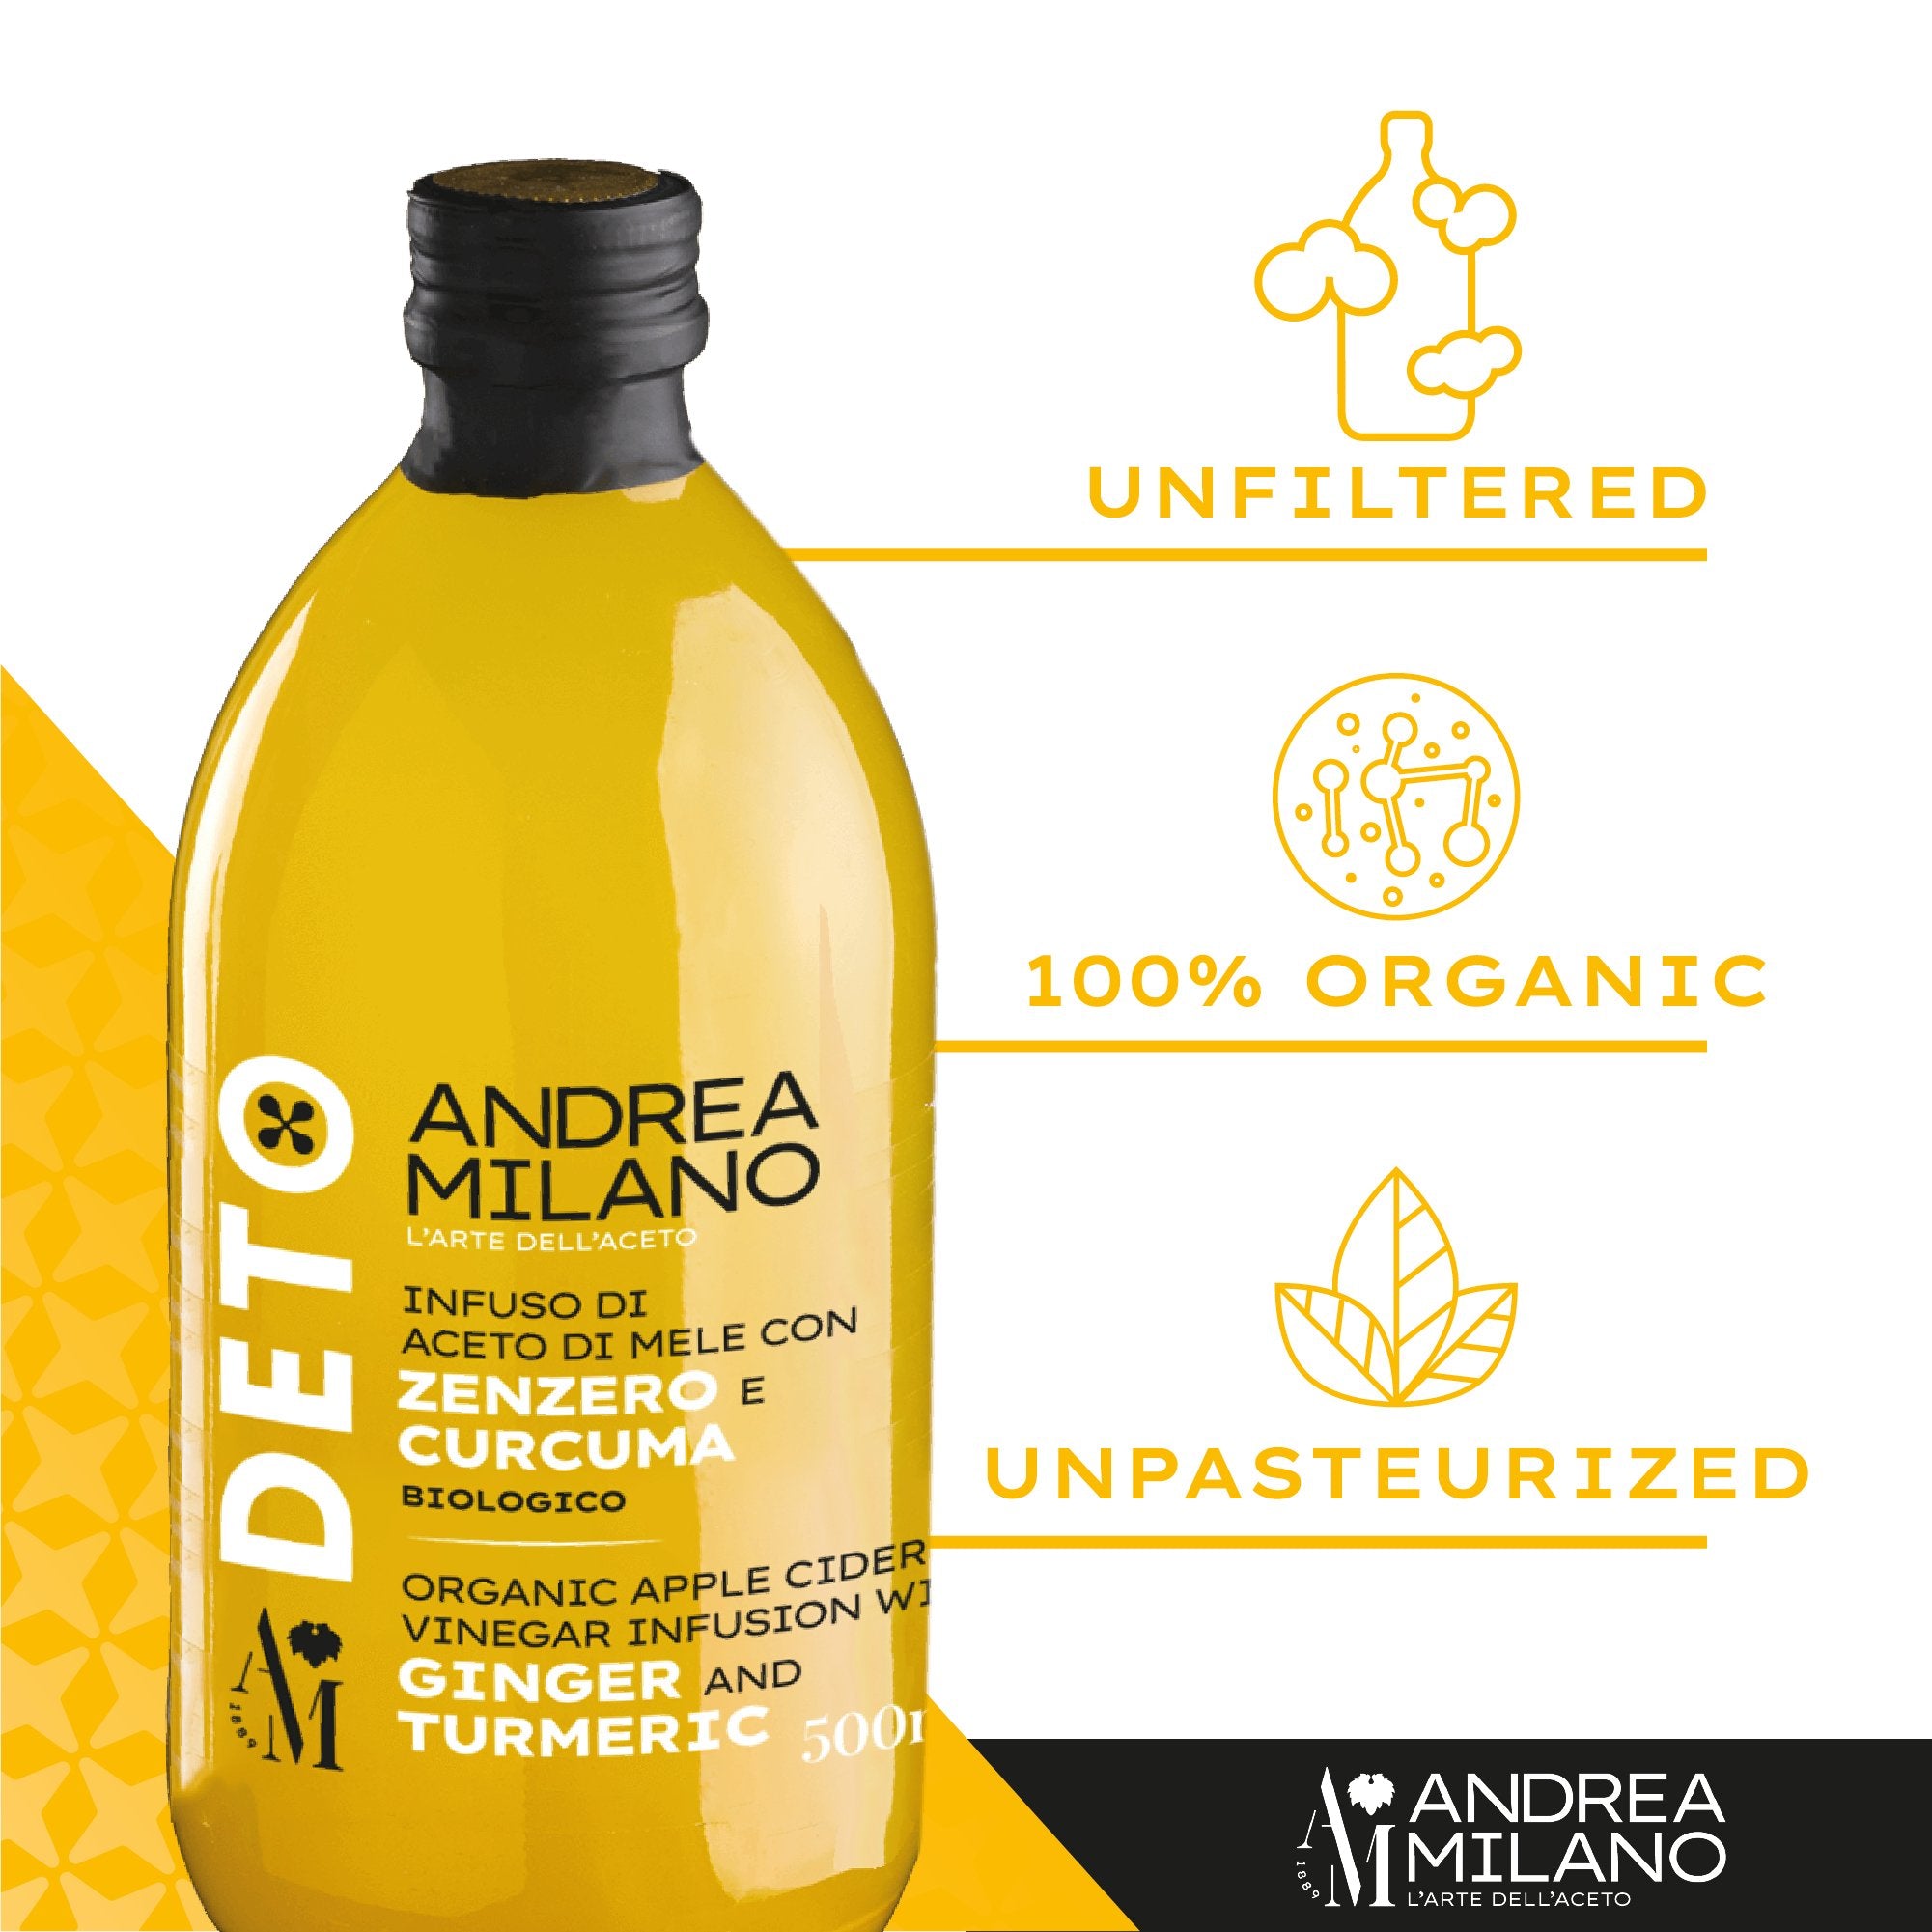 Features of Deto organic apple cider vinegar with ginger and turmeric by Andrea Milano.